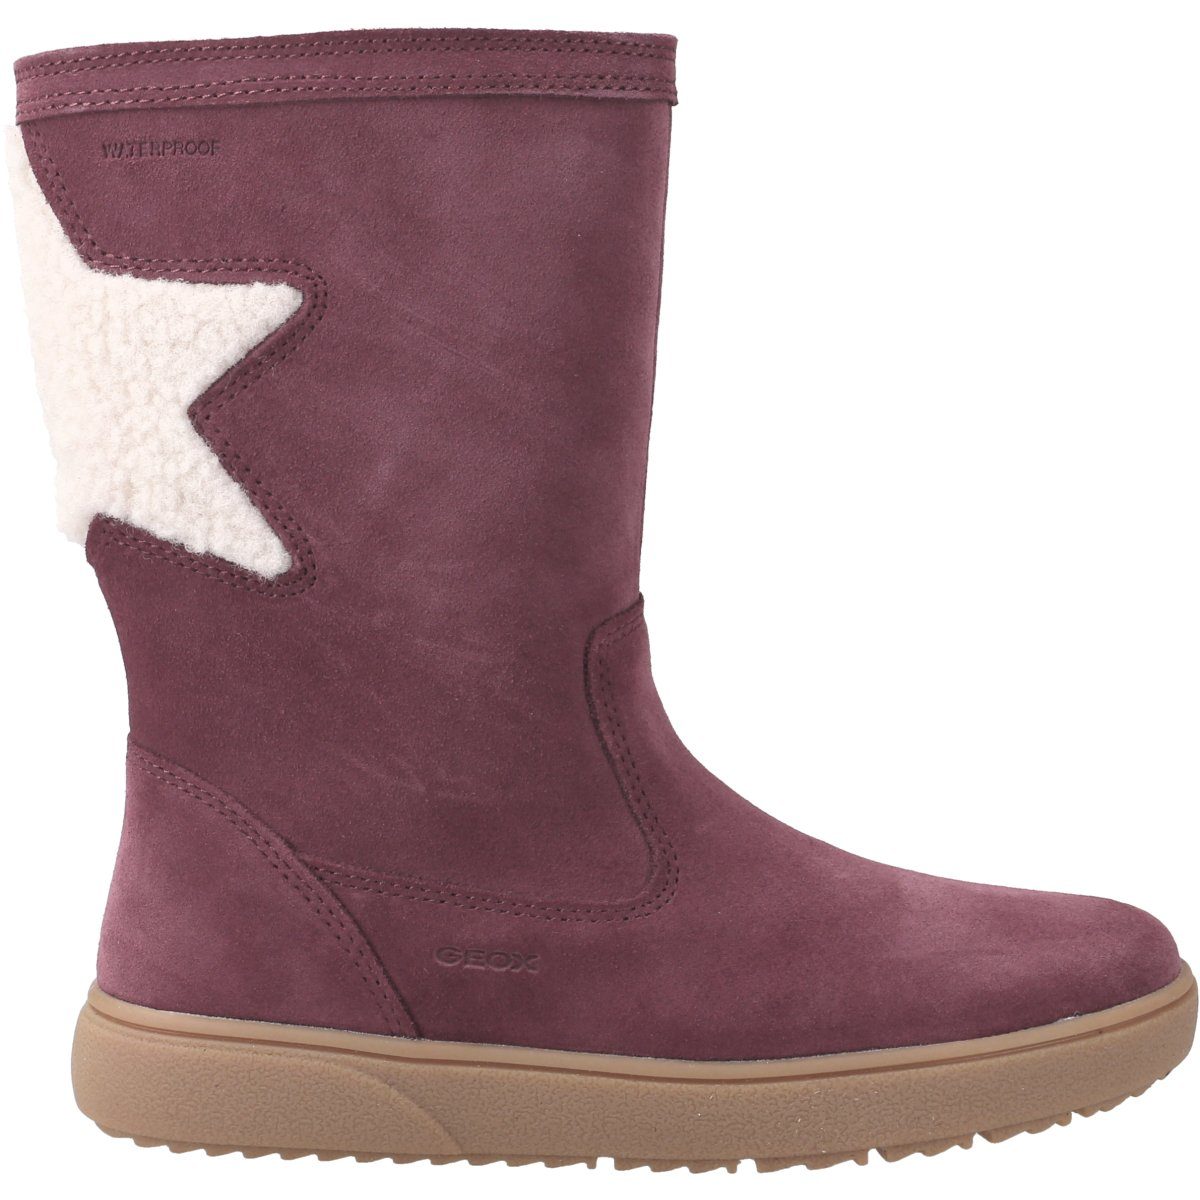 Geox THELEVEN Winterboots